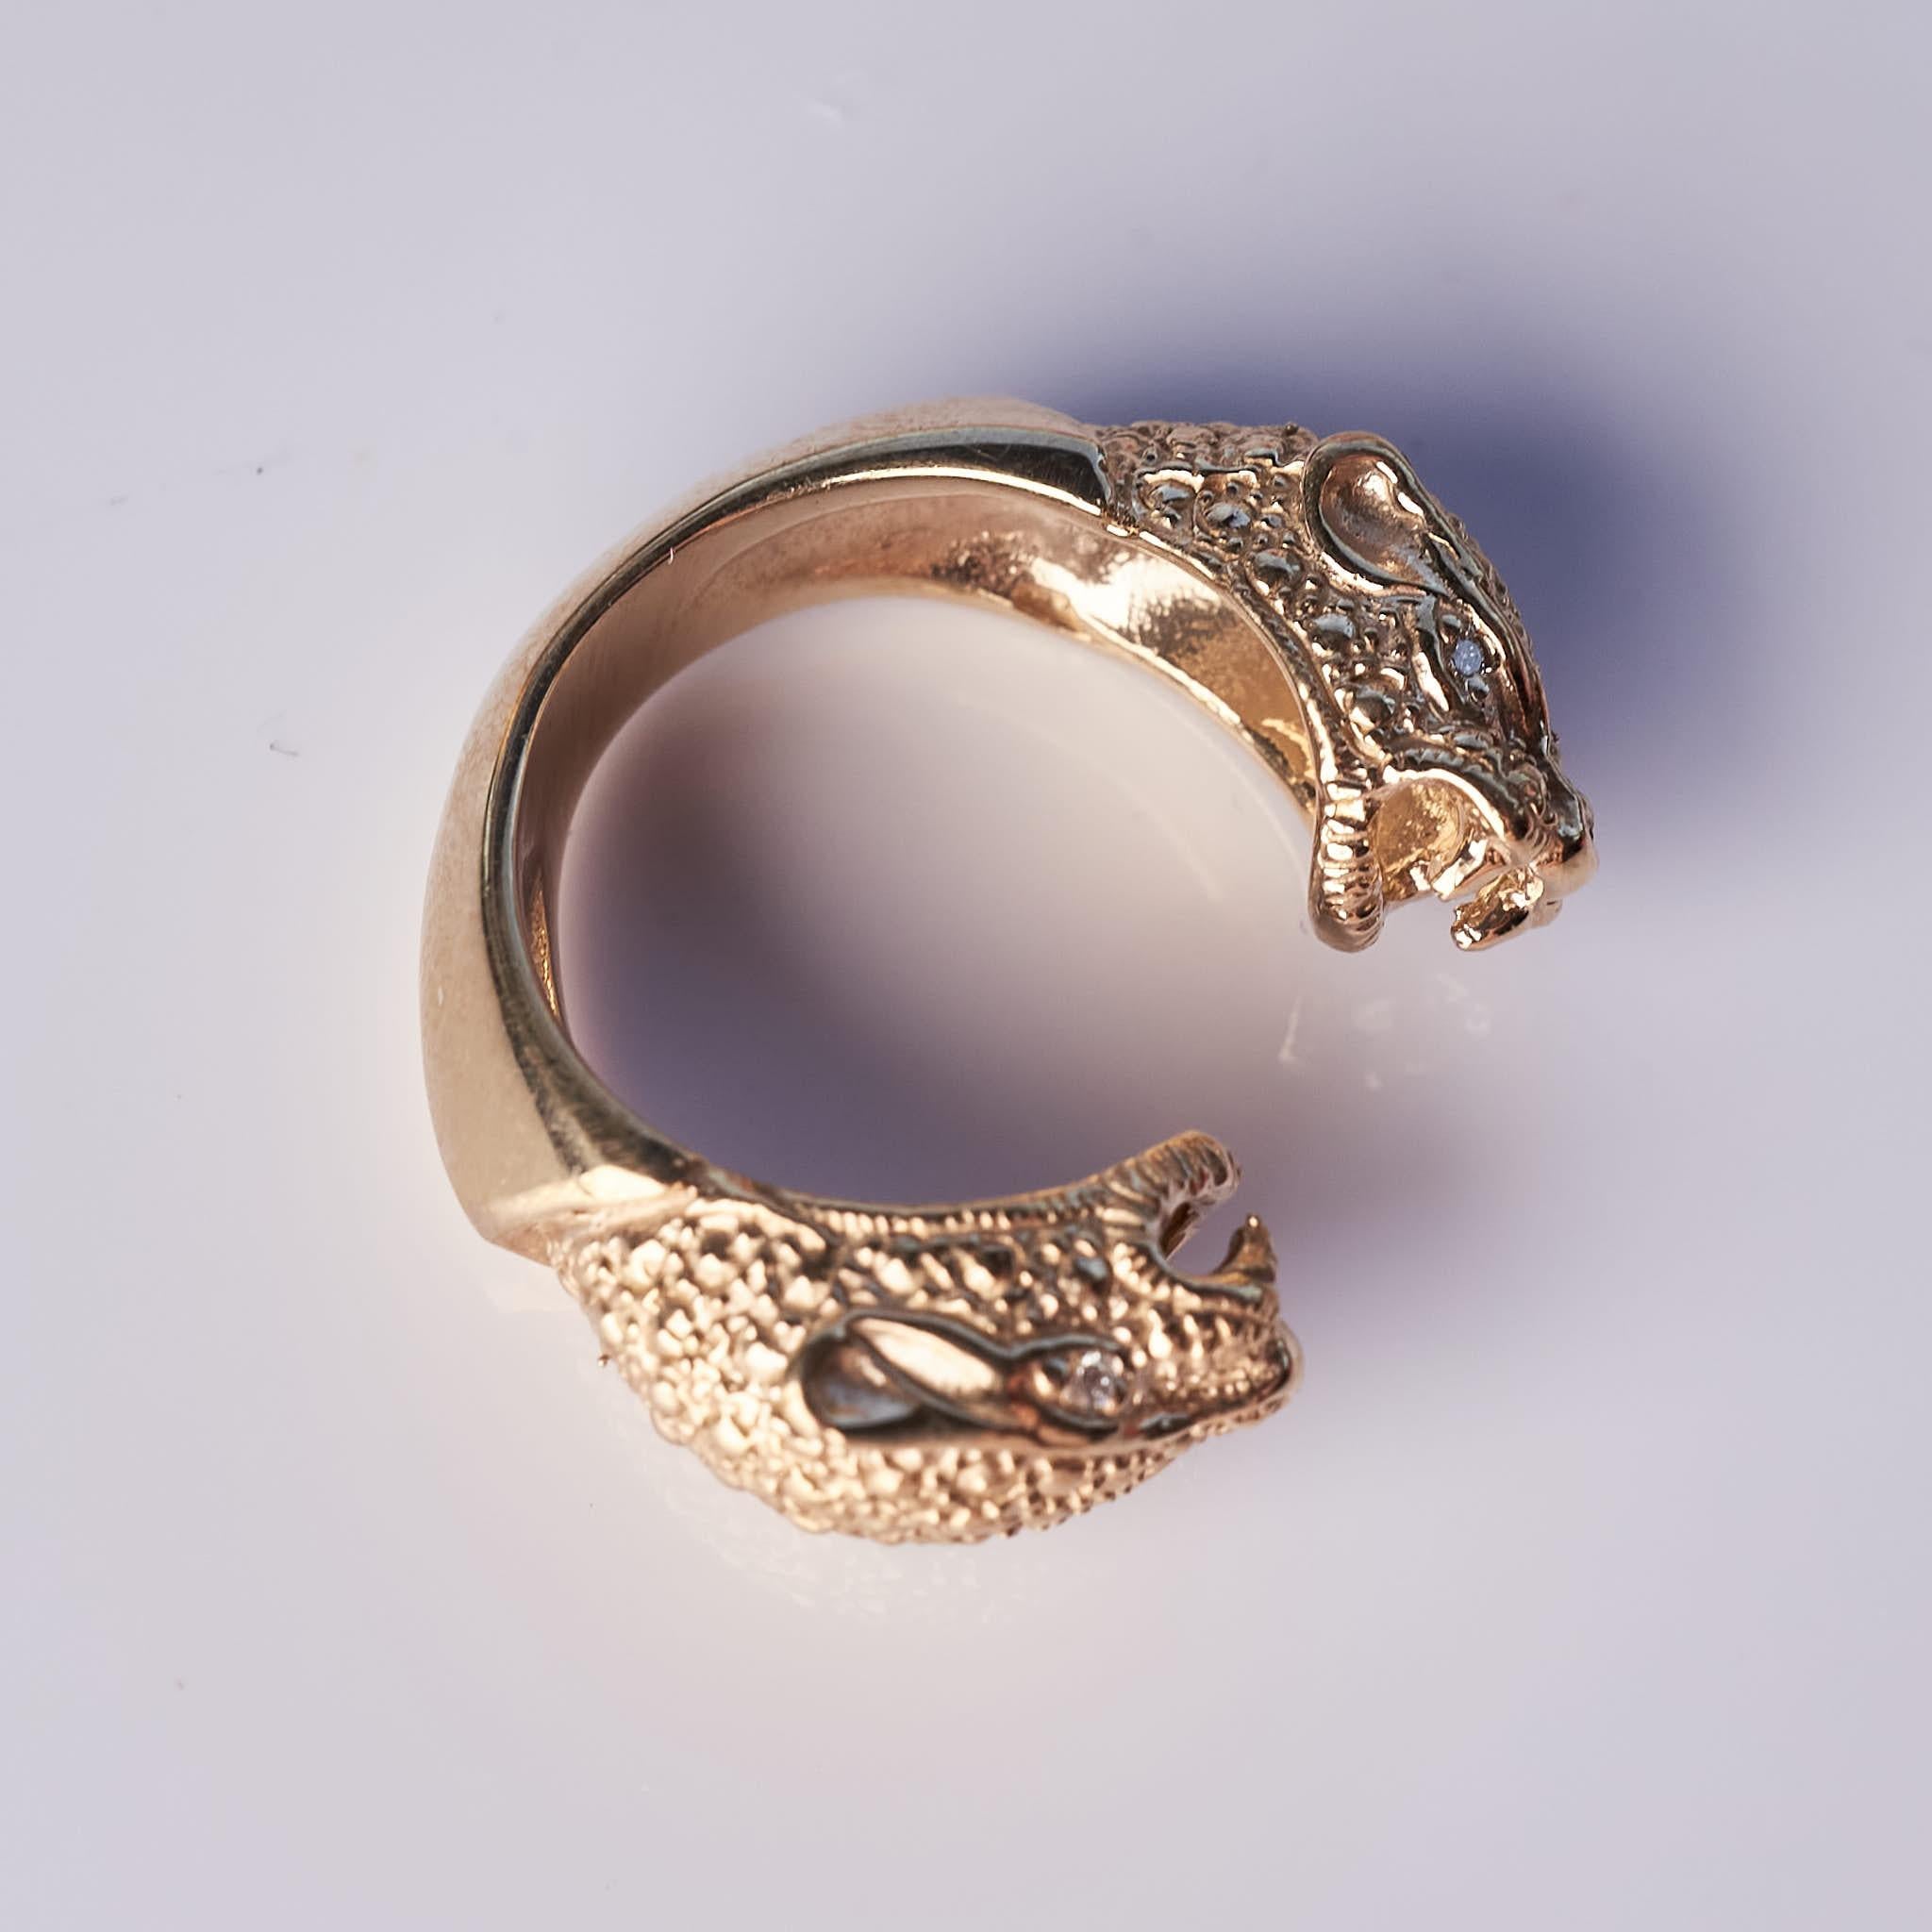 White Diamond Jaguar Panther Ring Bronze Animal Jewelry J Dauphin In New Condition For Sale In Los Angeles, CA